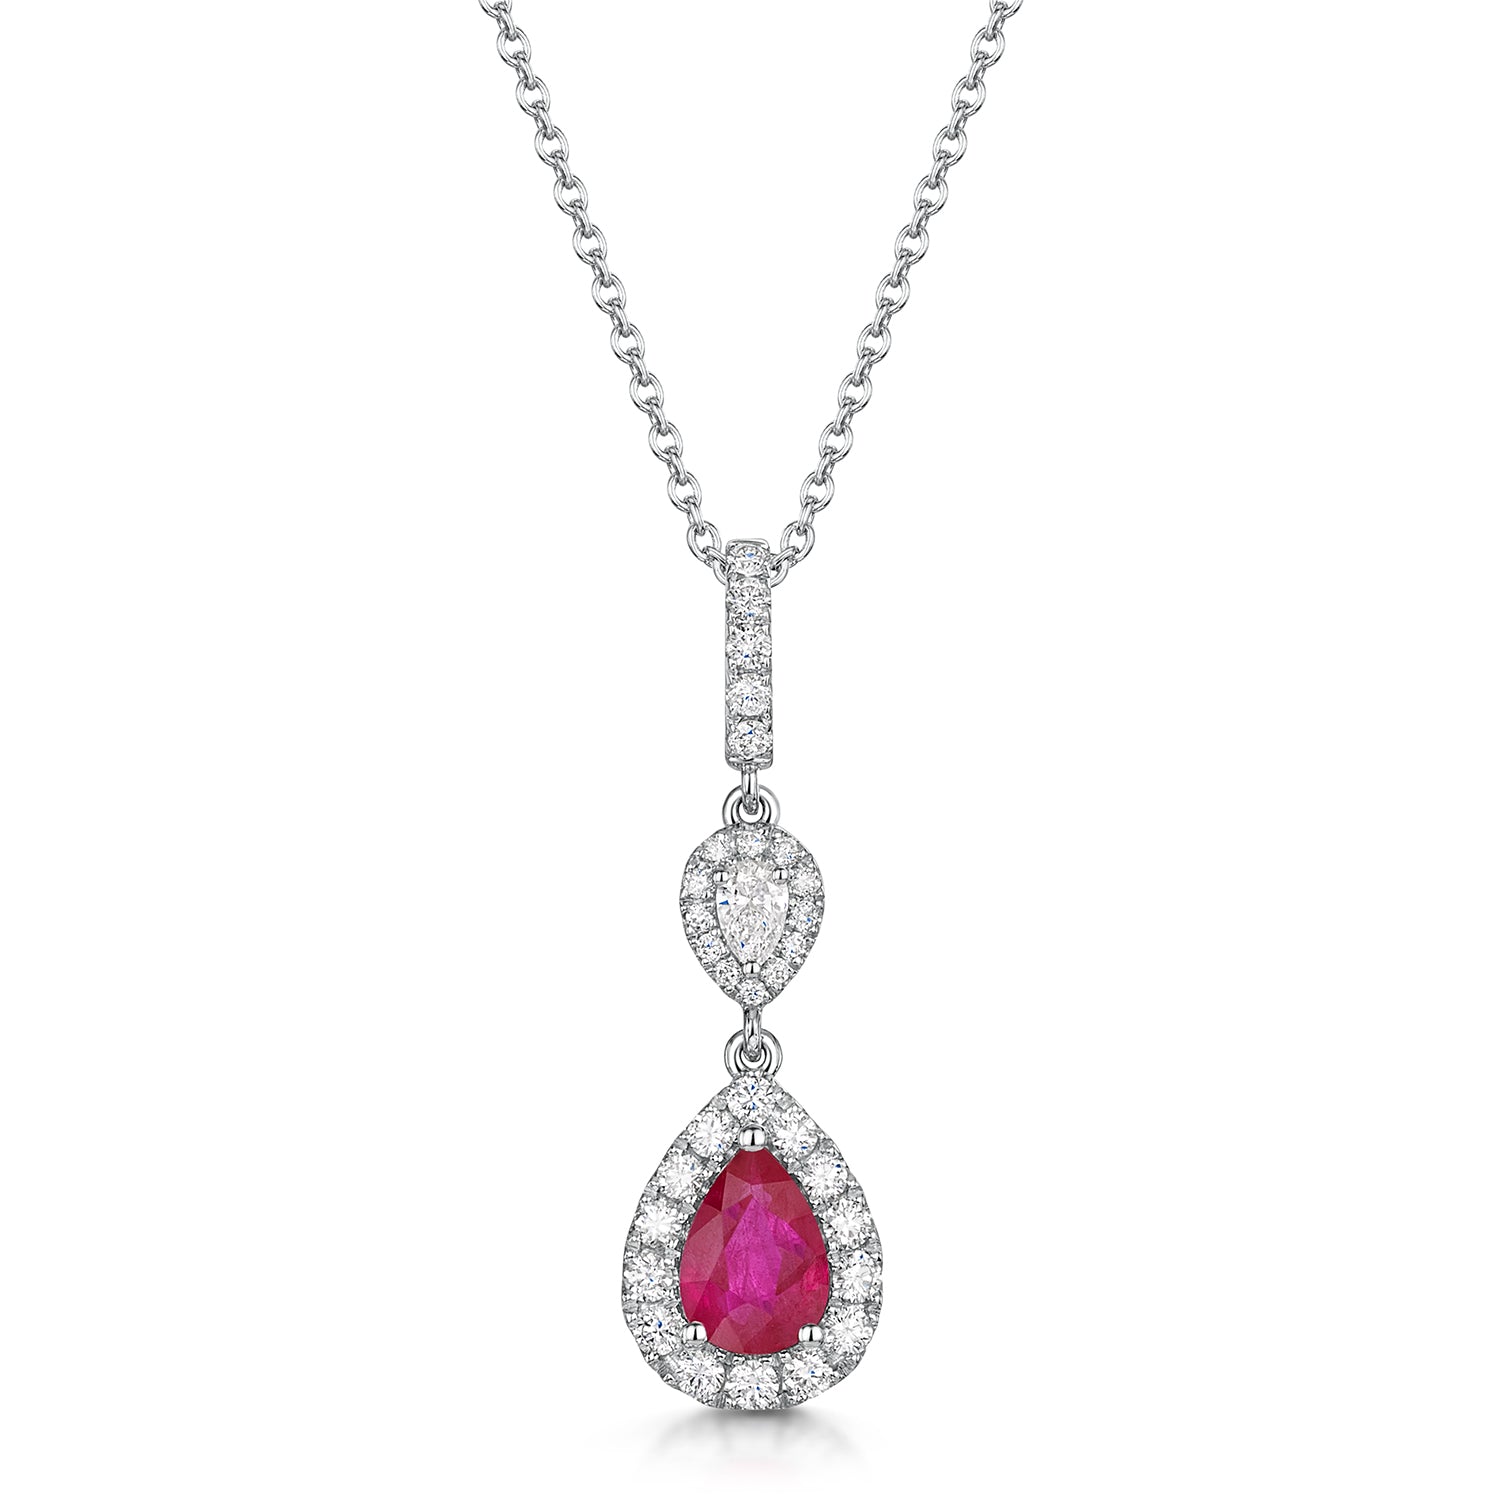 18ct White Gold Pear Cut Ruby And Diamond Pendant